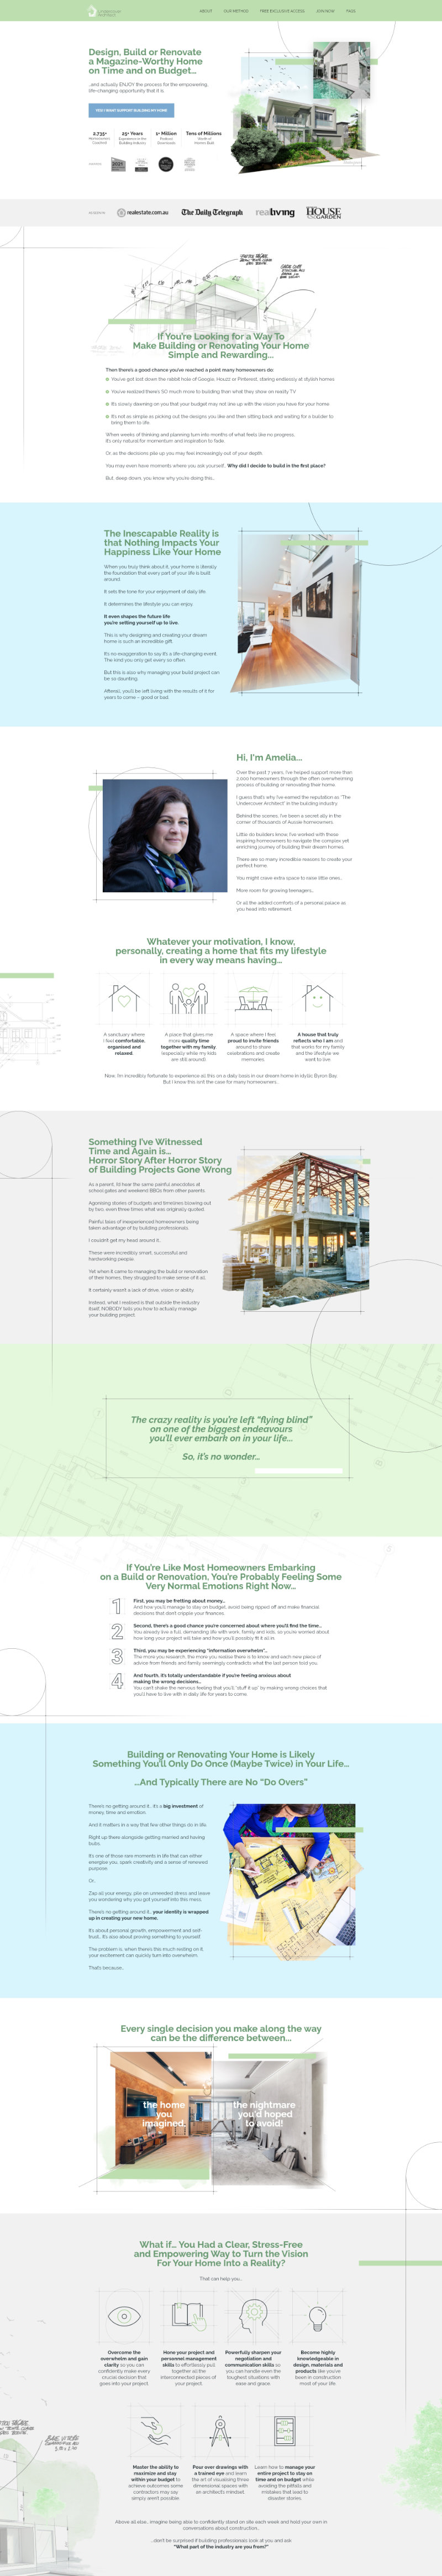 LANDING-PAGE-1-UNDERCOVER-ARCHITECT